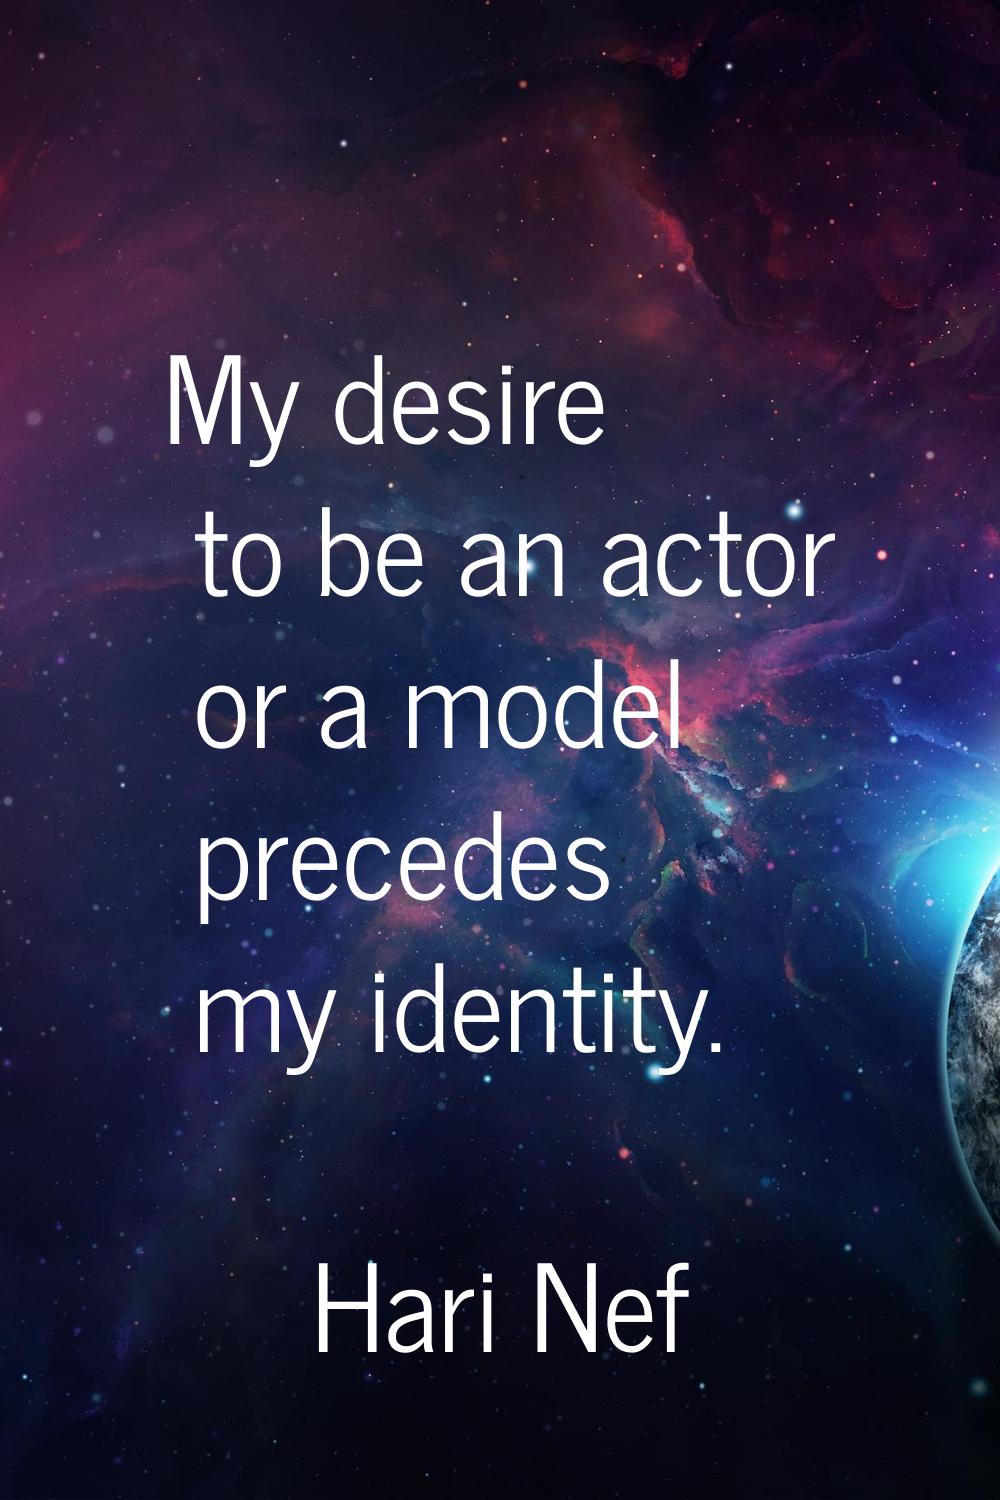 My desire to be an actor or a model precedes my identity.